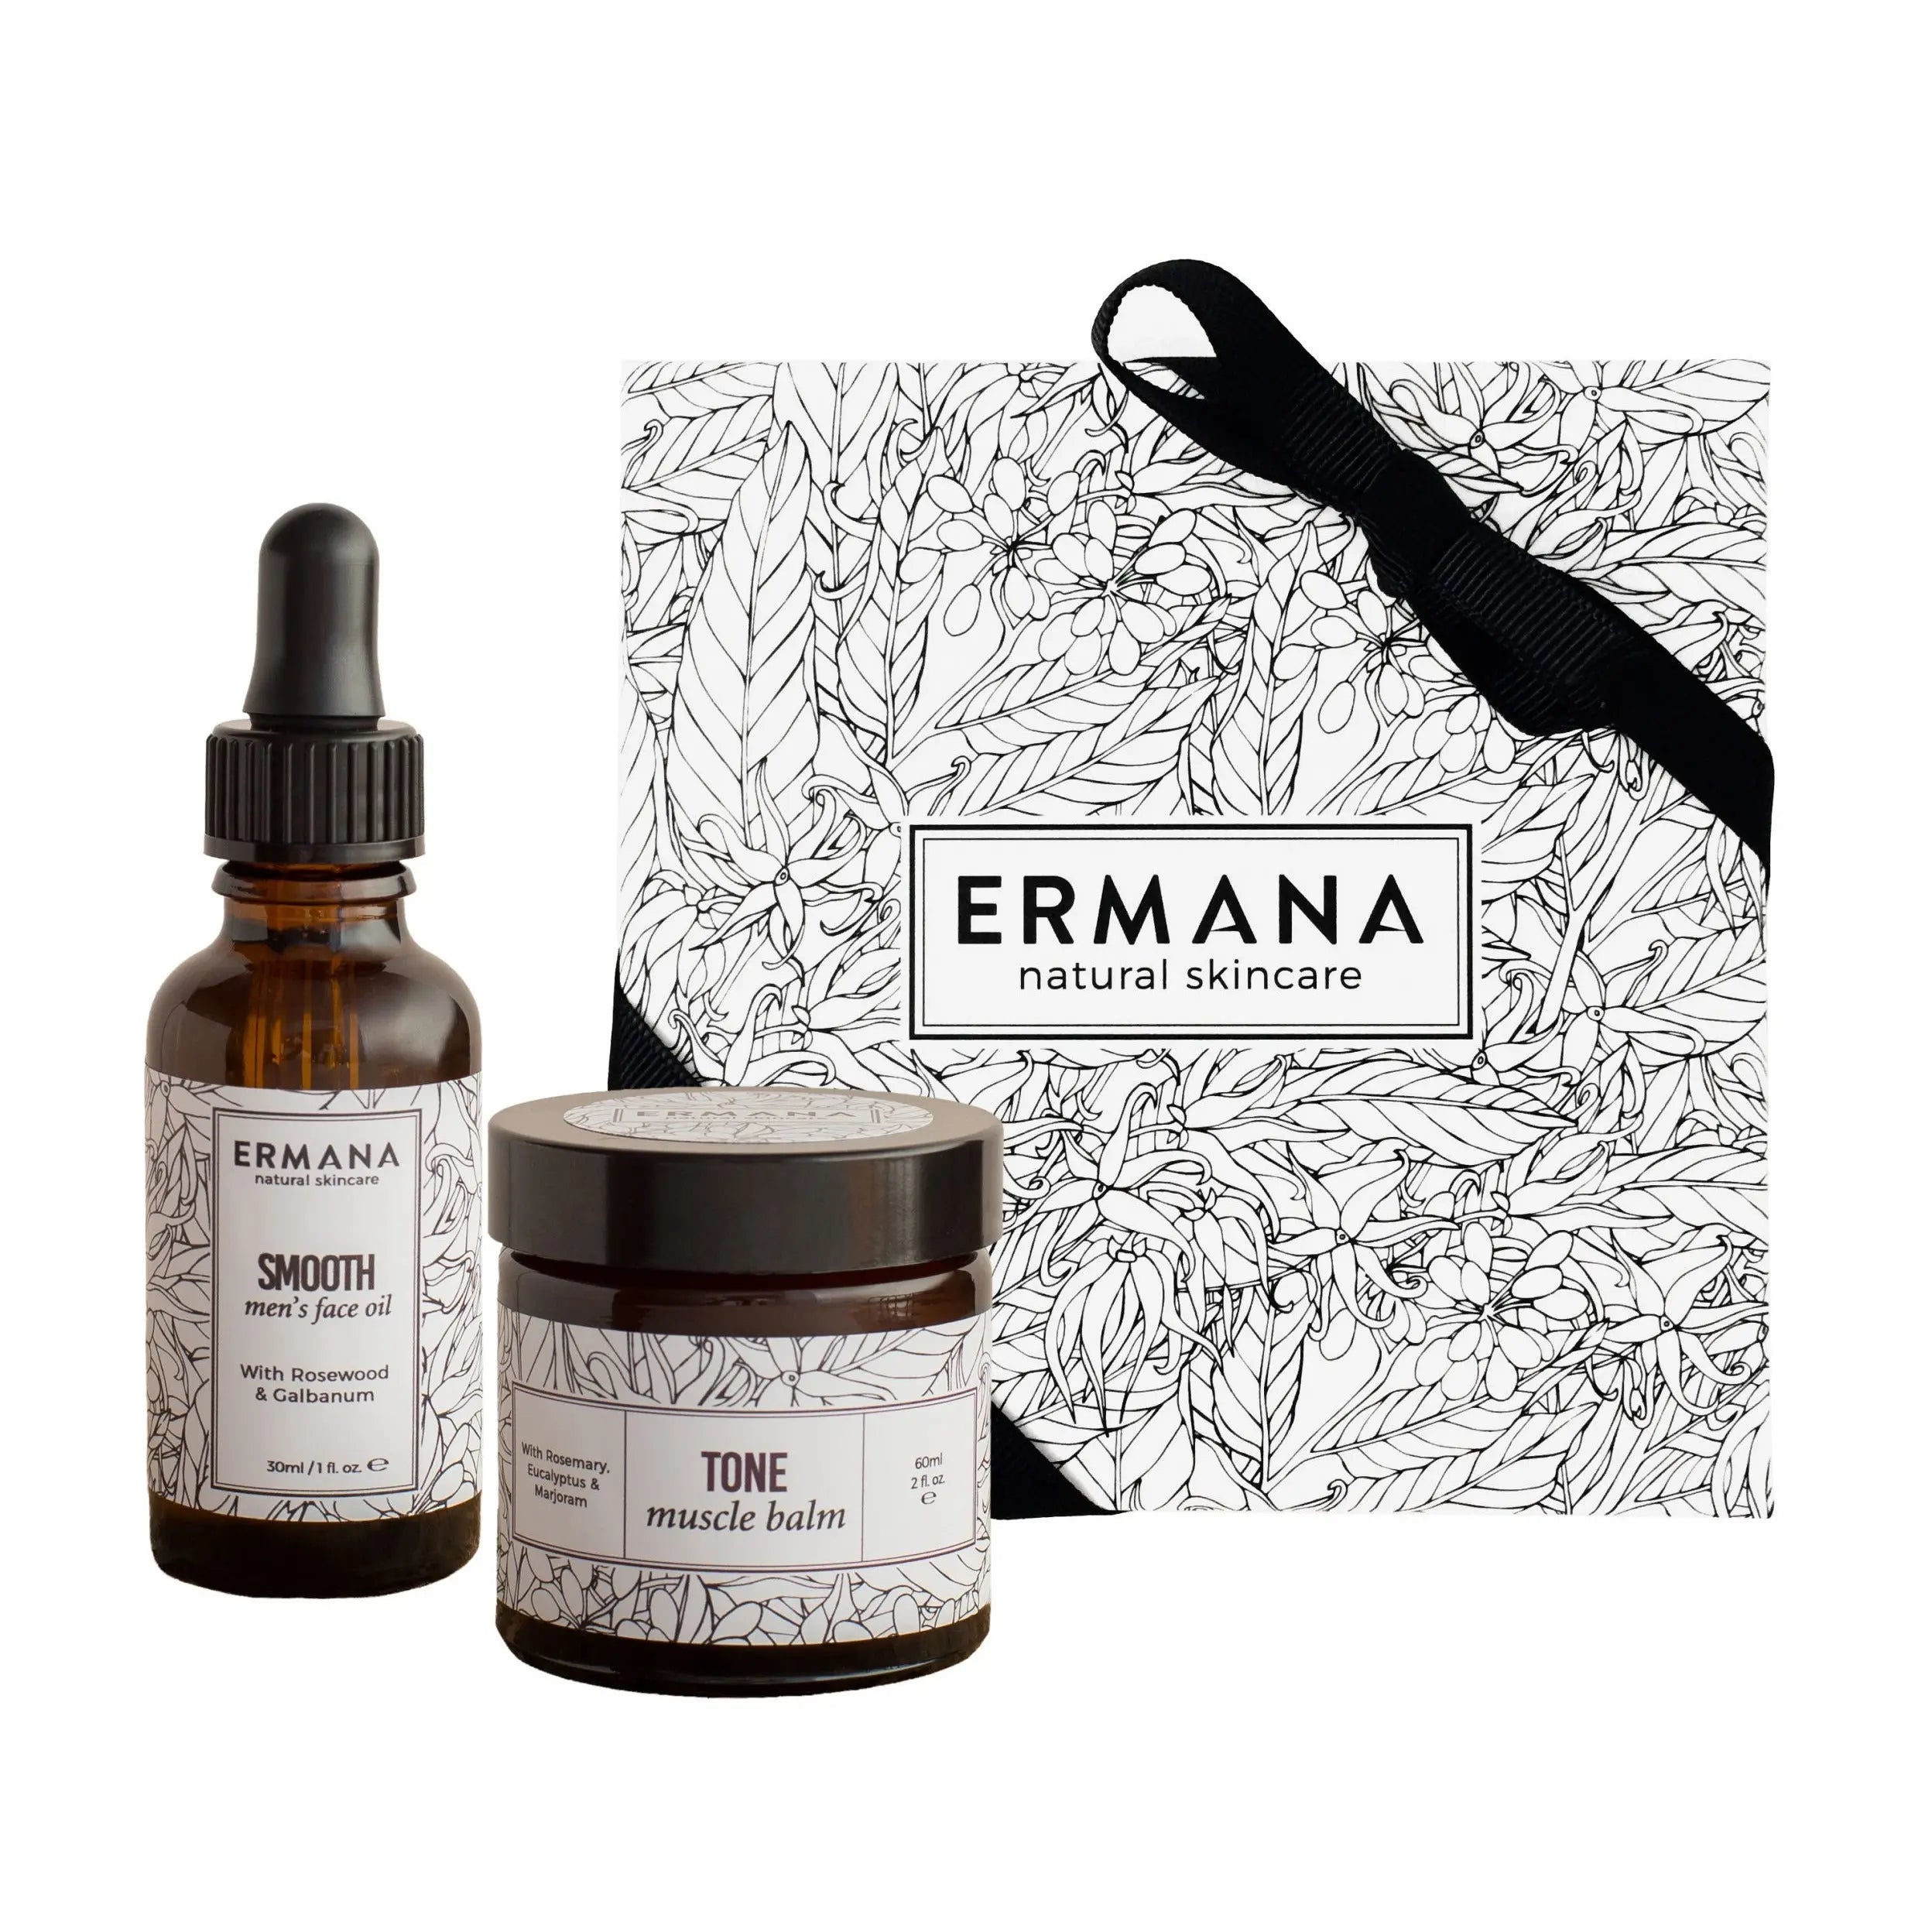 Smooth Men's Gift Set with smooth face oil and tone muscle balm - Ermana Natural Skincare 